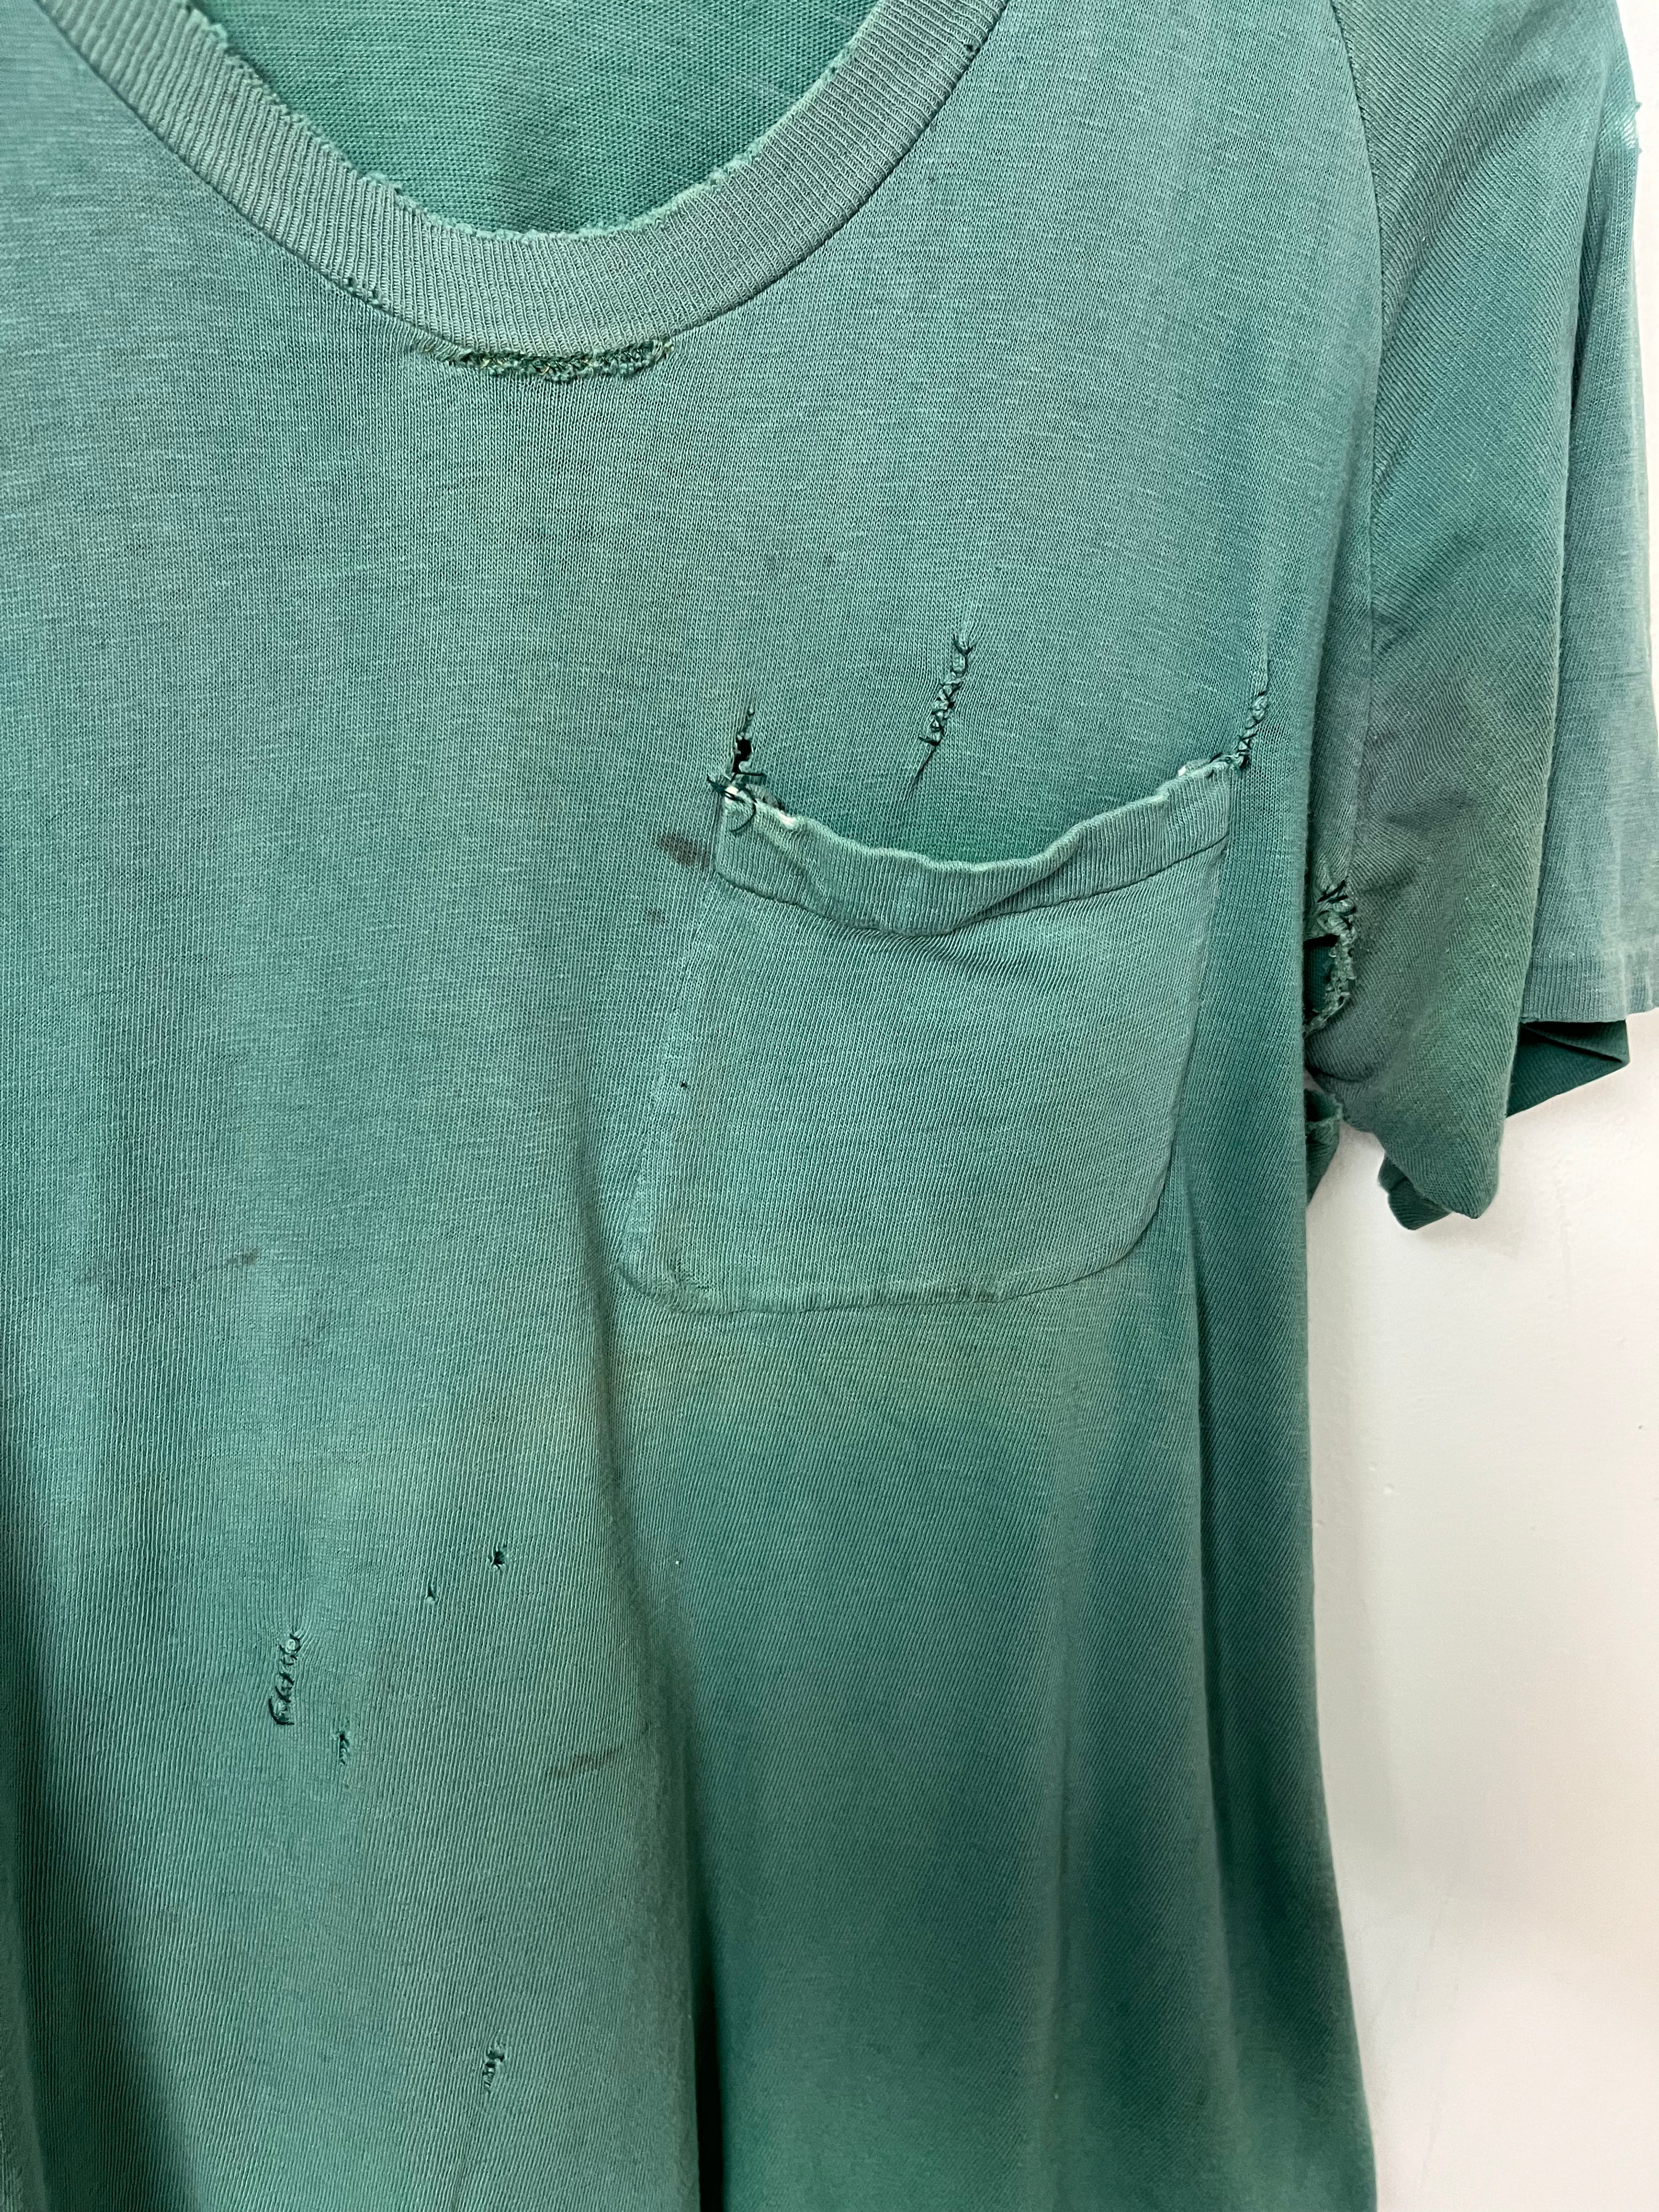 Early 1960s Hanes Distressed & Repaired Raglan Pocket T-Shirt - Faded Green - S